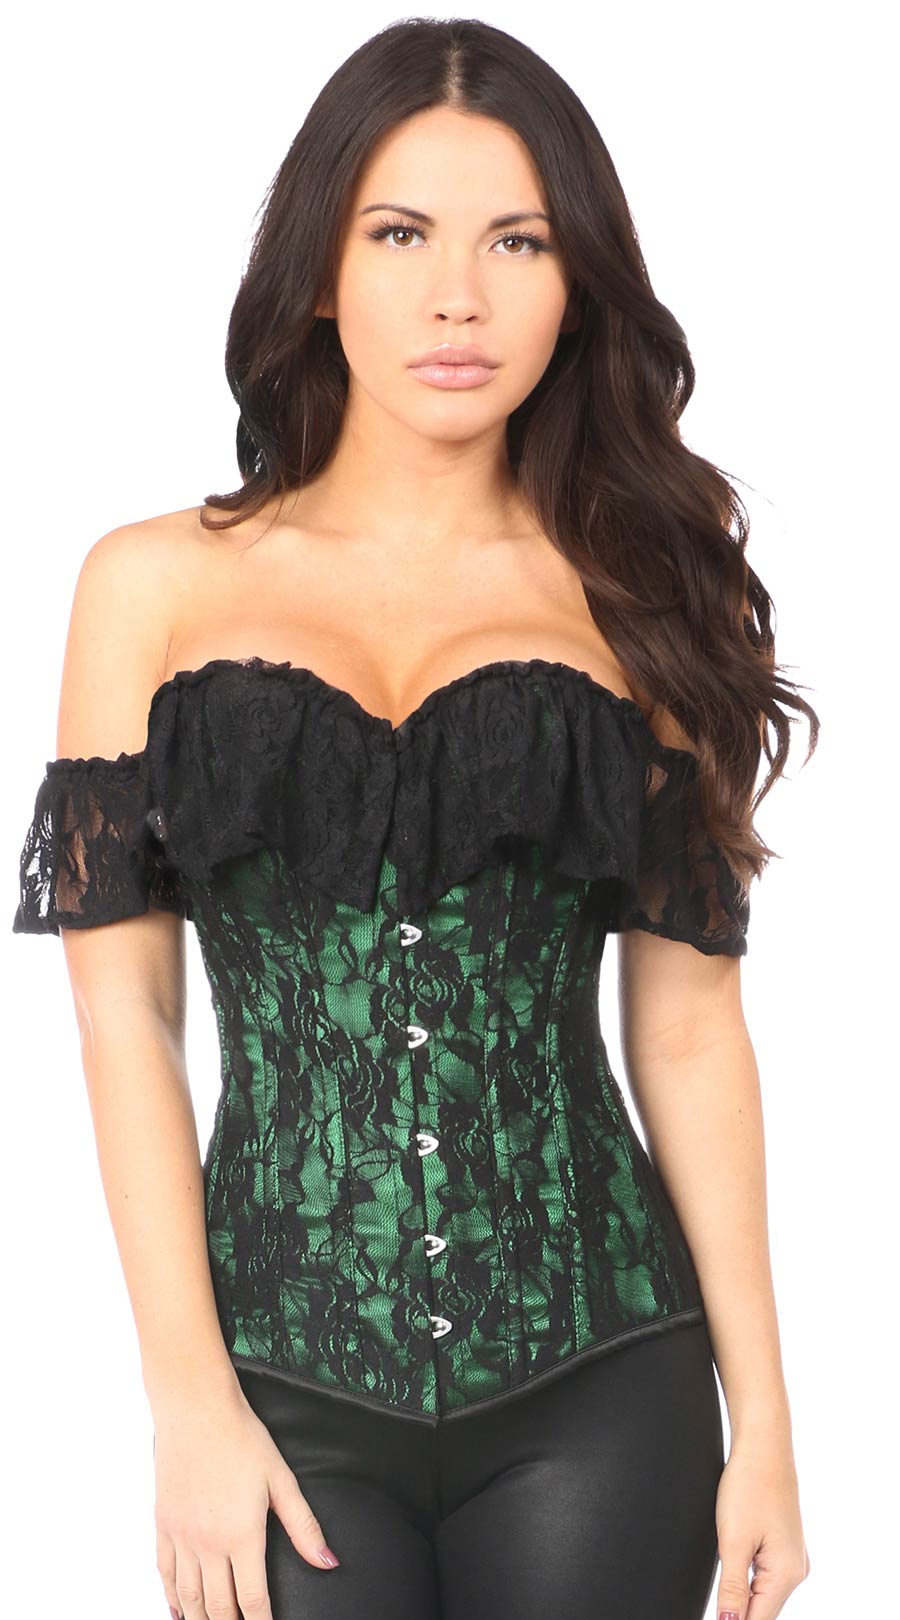 Lace Off-The-Shoulder Corset in Green